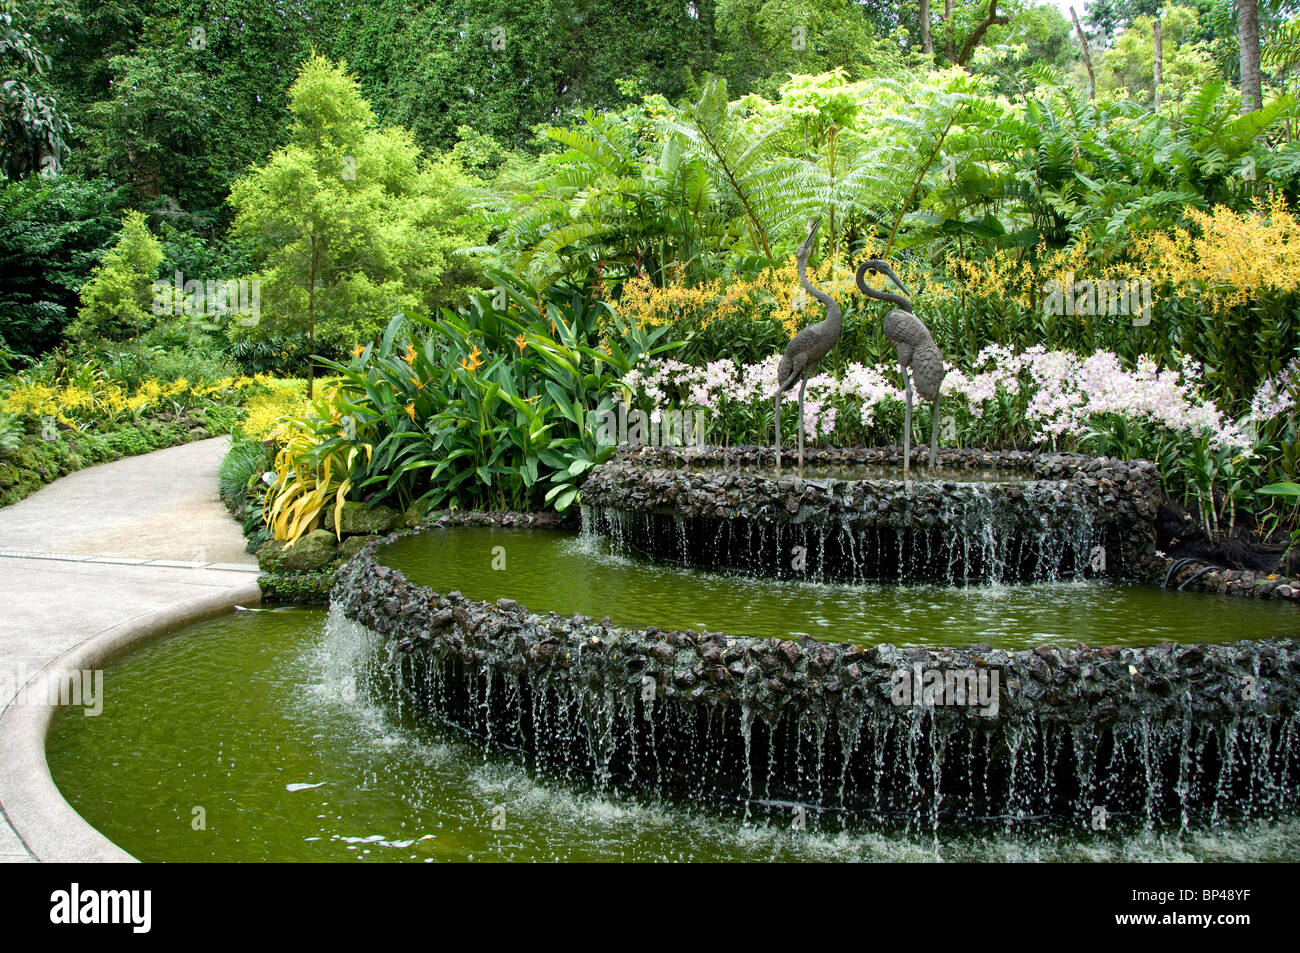 Singapore (Sanskrit for Lion City). National Orchid Garden located within the Botanic Gardens. Stock Photo